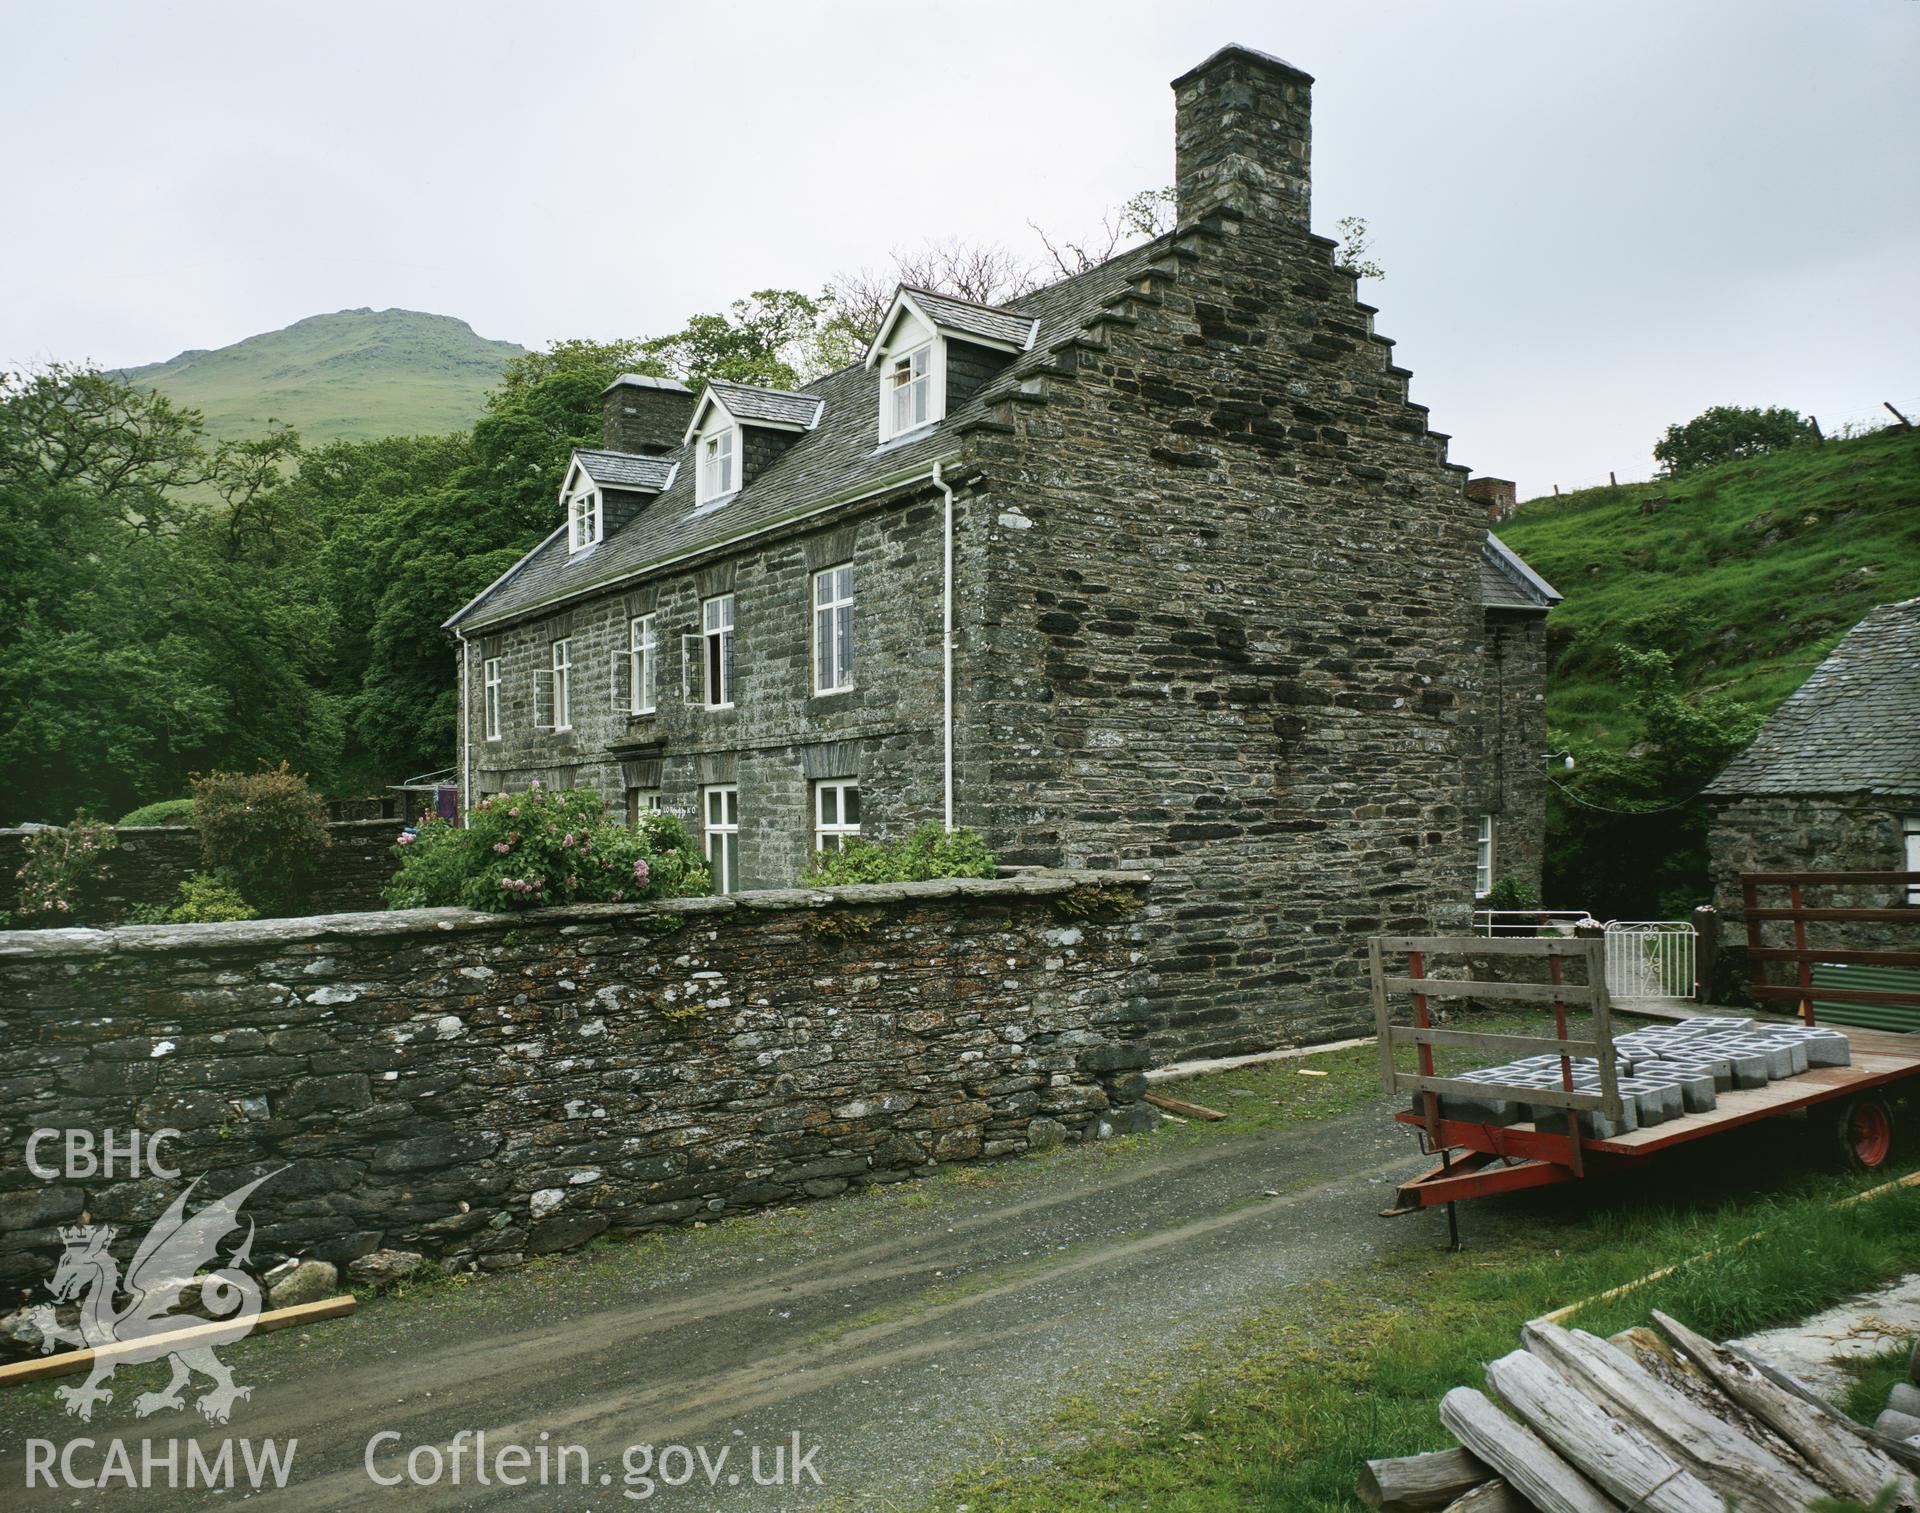 RCAHMW colour transparency showing Cae'r Berllan, Merioneth taken by I.N. Wright, 1979